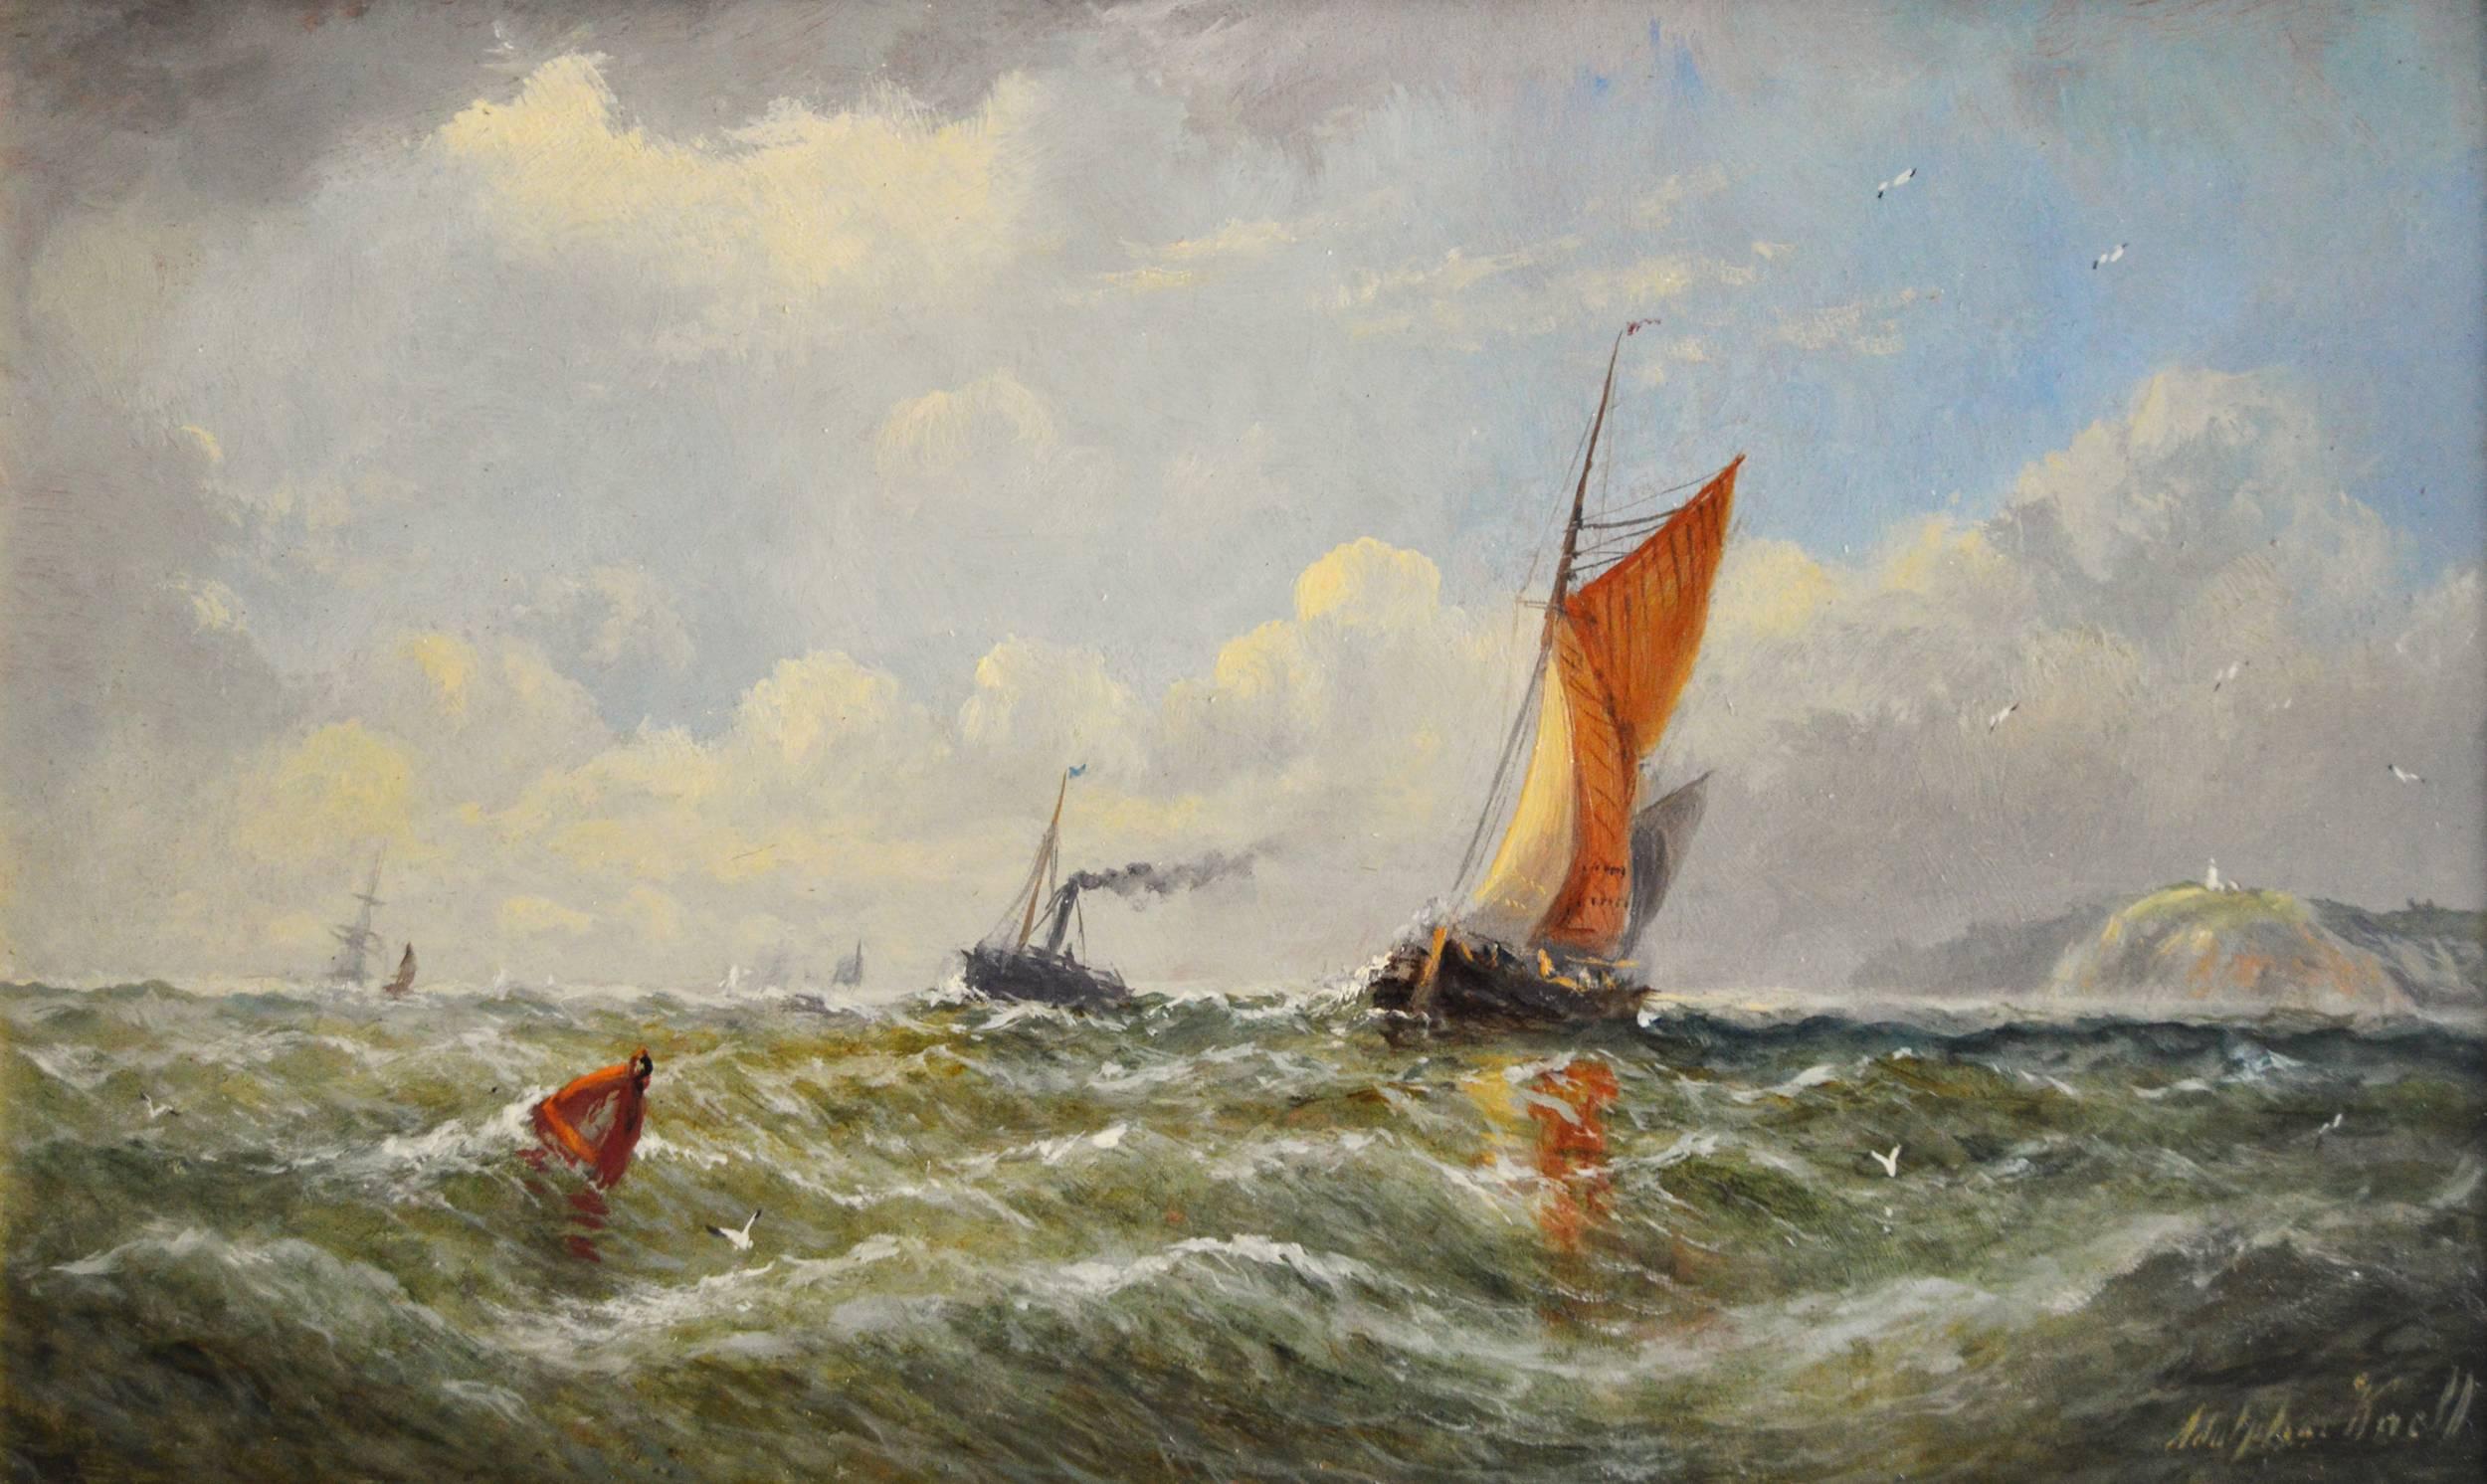 19th Century marine scene with ships - Painting by Adolphus Knell